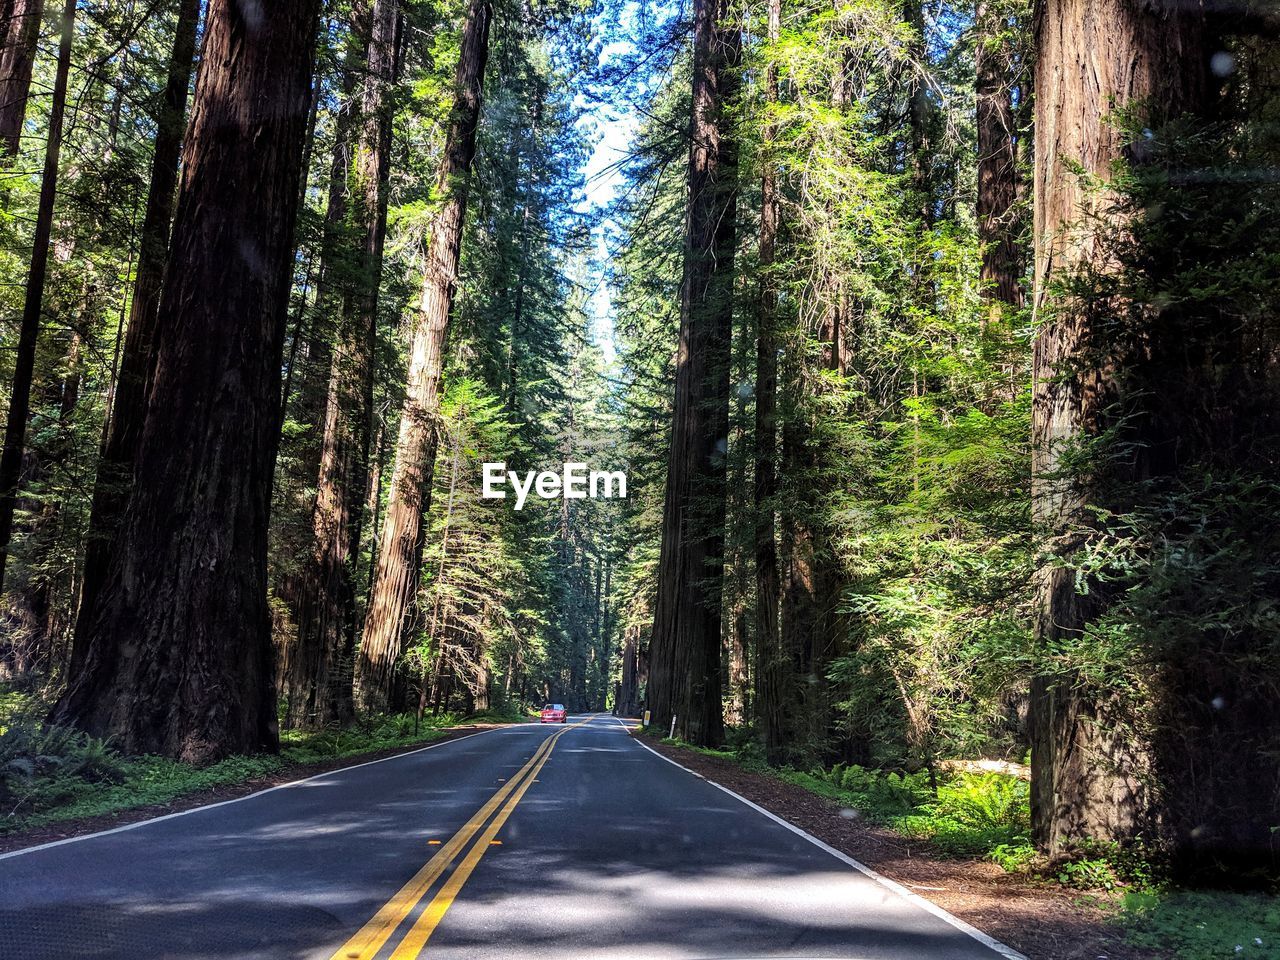 Road along icon giant redwood trees in forest in northern california